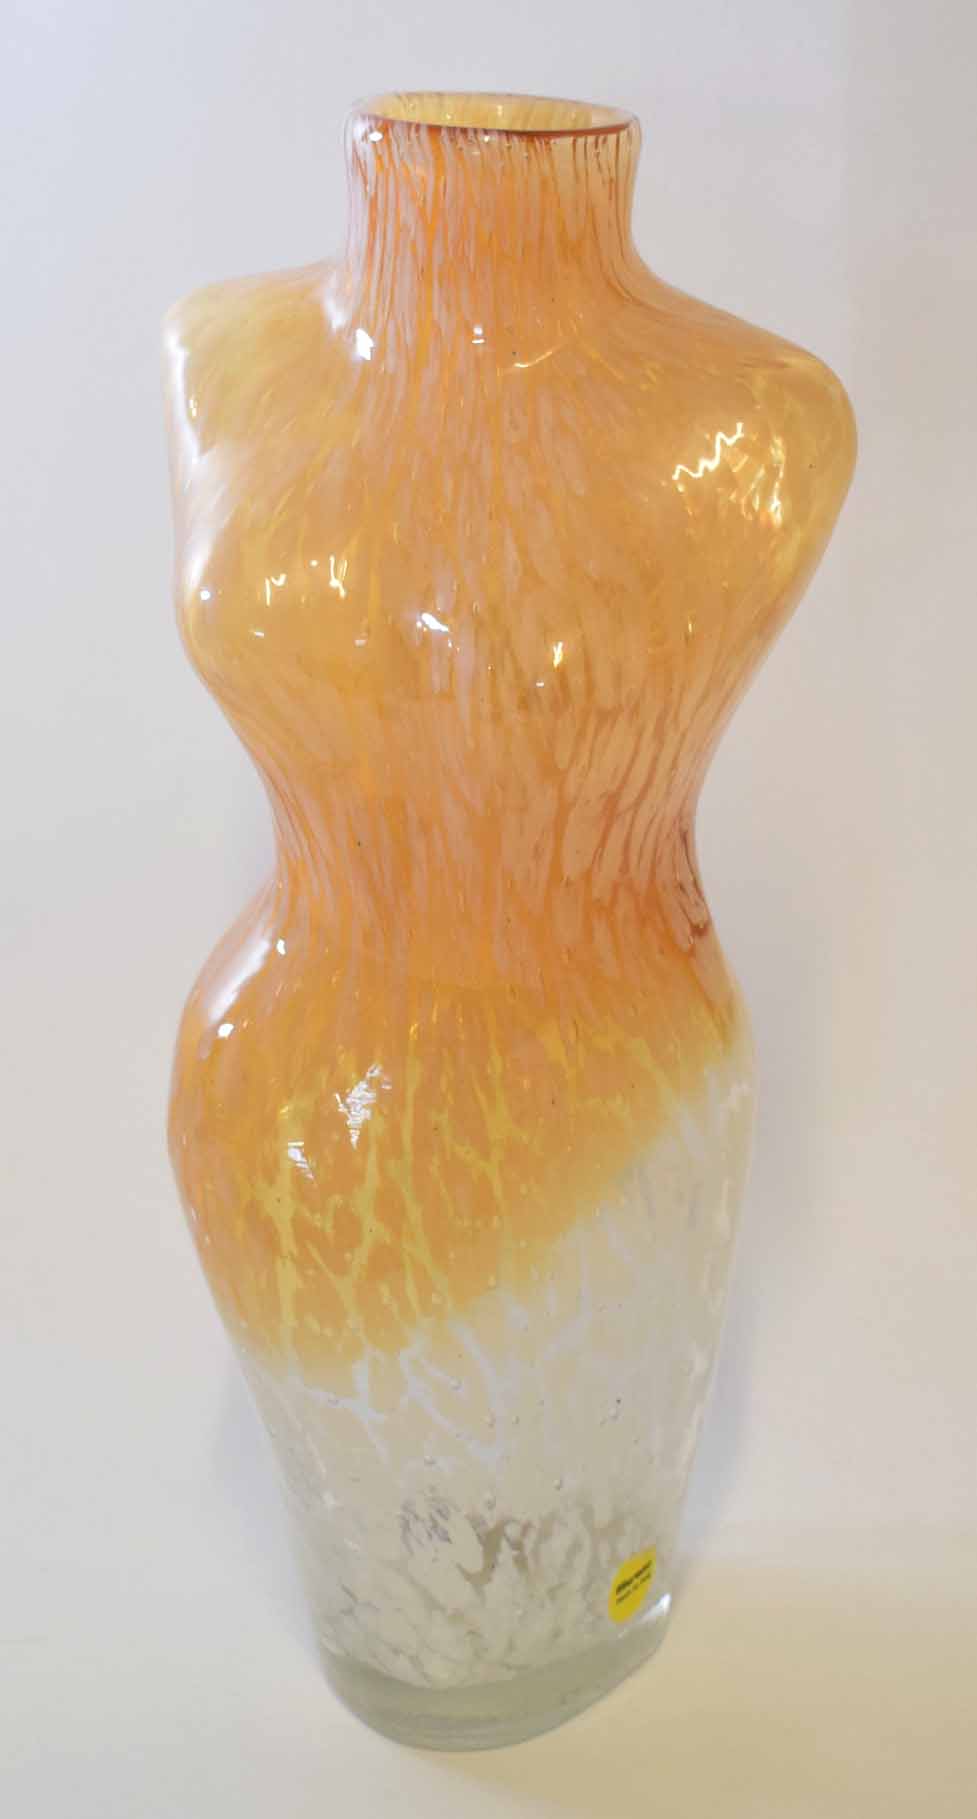 Shouldered glass vase modelled in the female form, 36cm high, Murano sticker to side